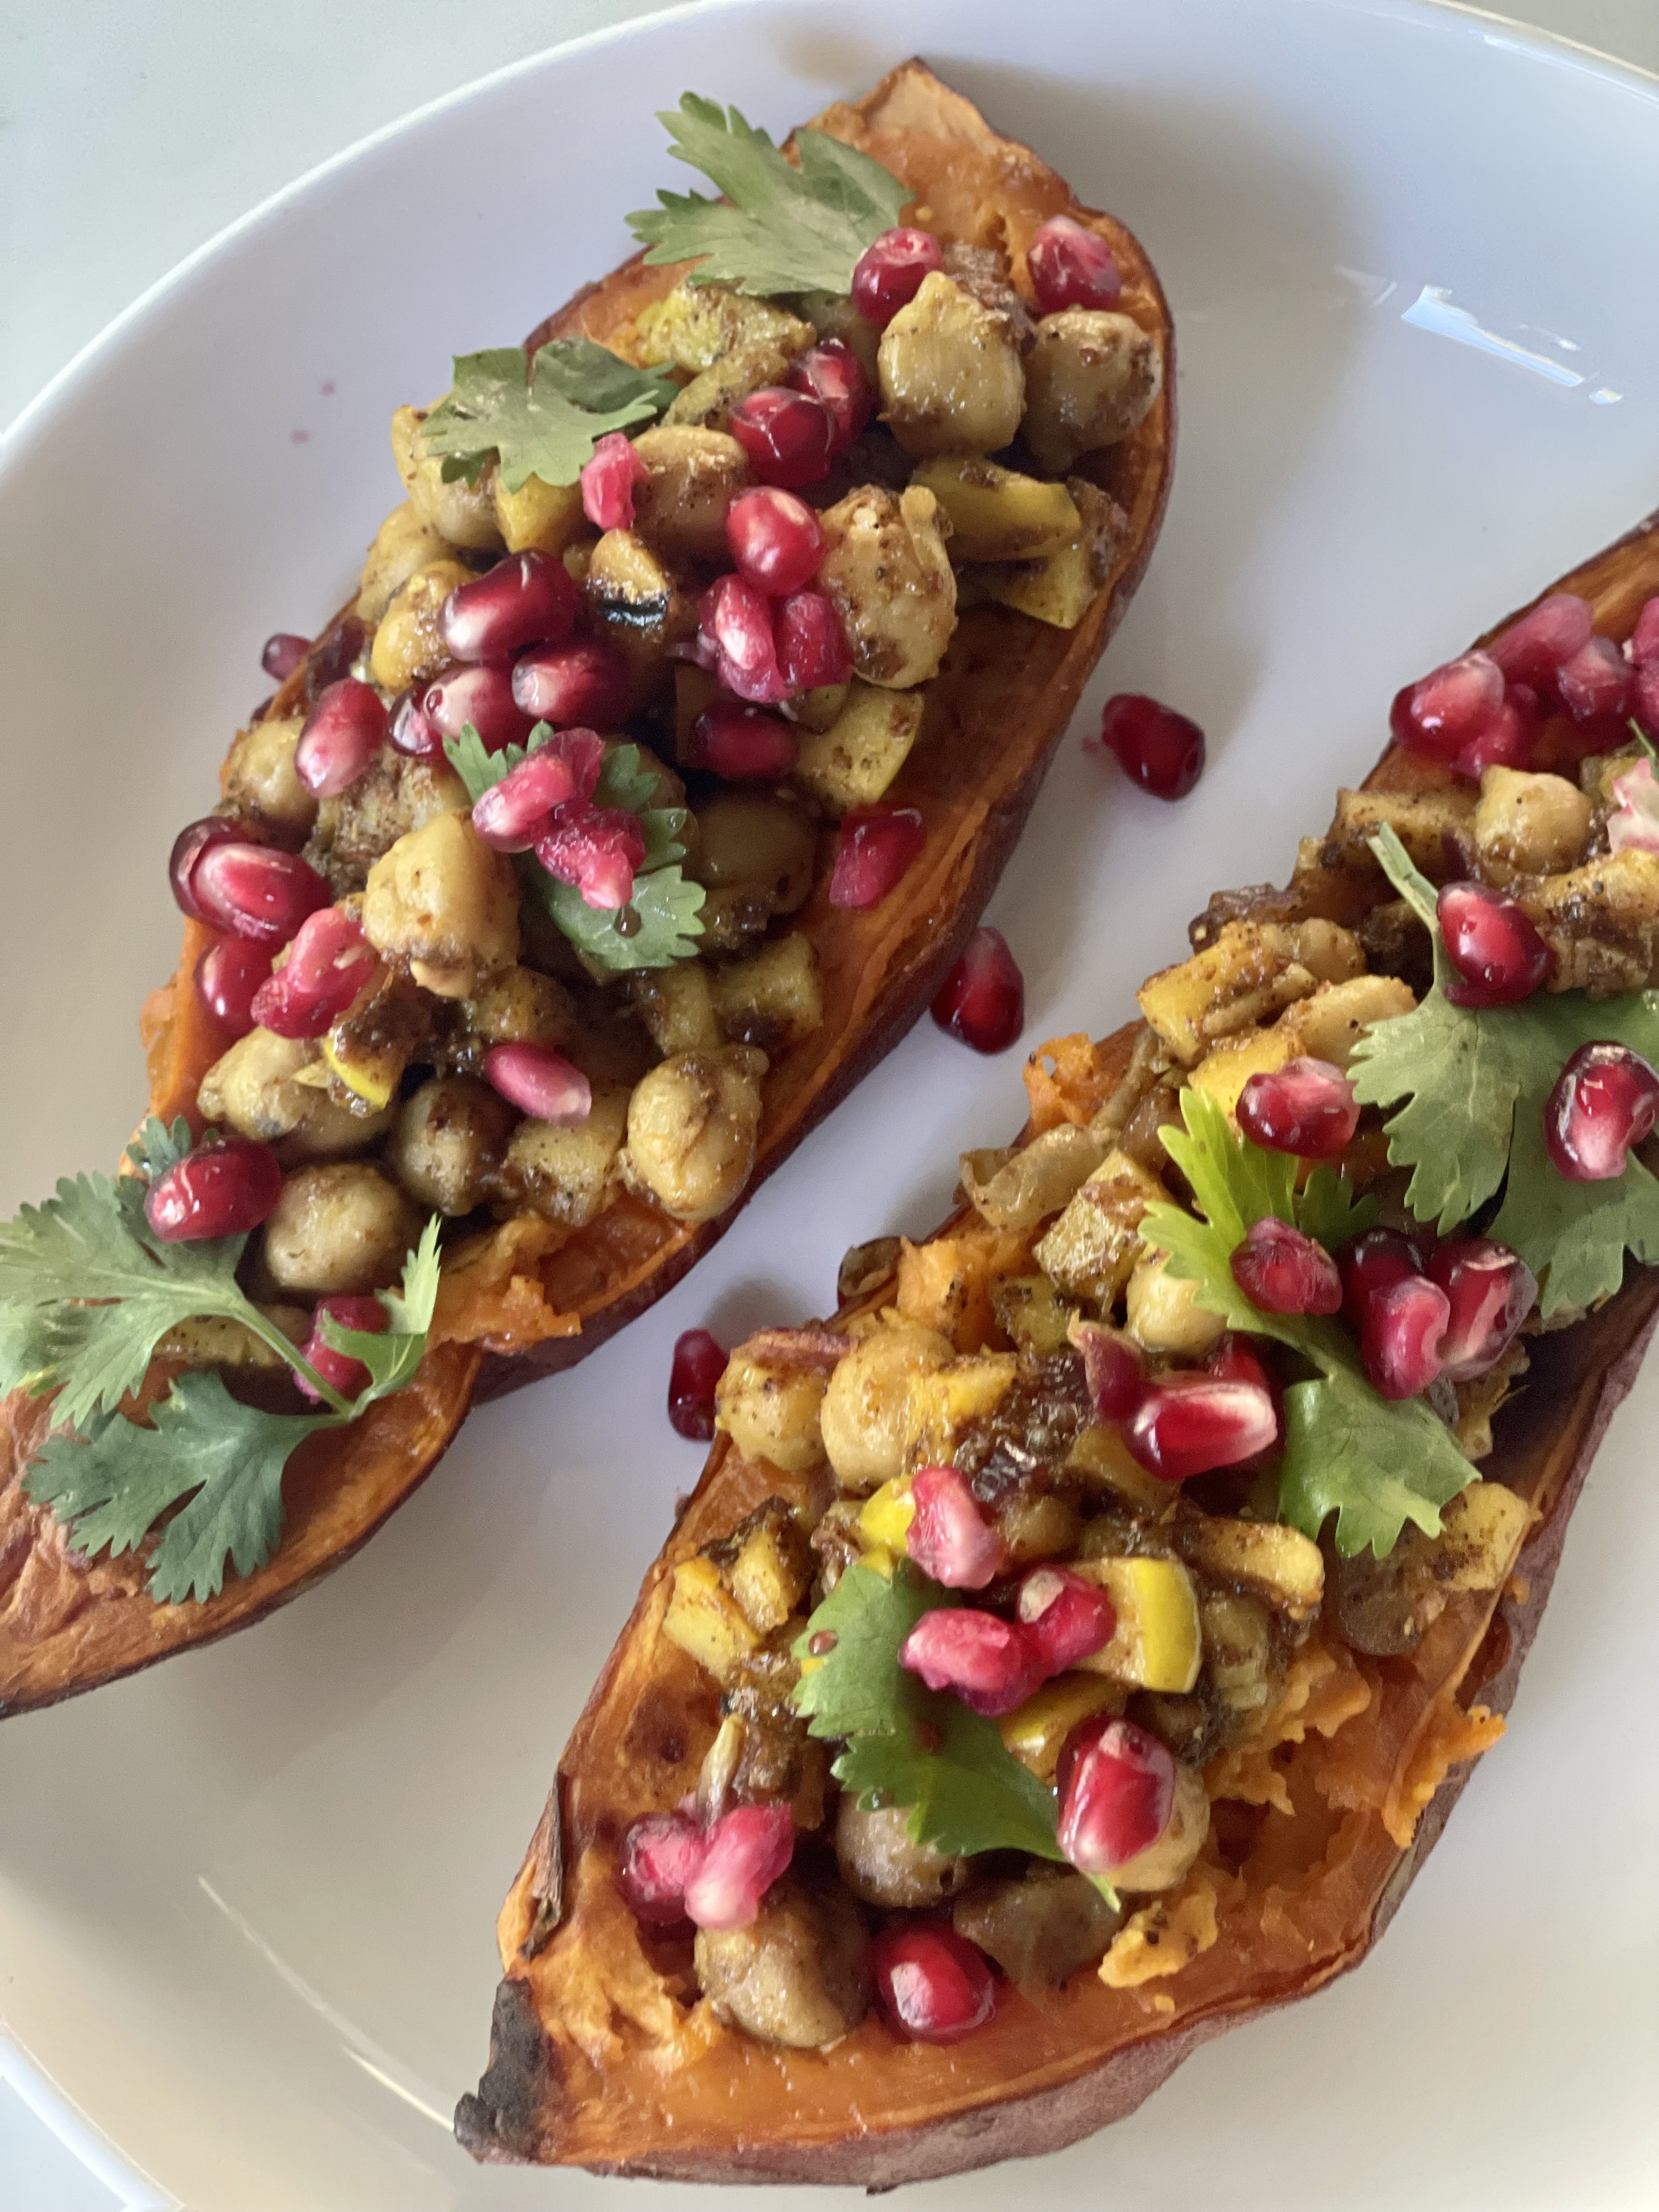 Moroccan Roasted Sweet Potatoes, Garbanzo Beans, Apple, Pomegranate Seeds, Herbs